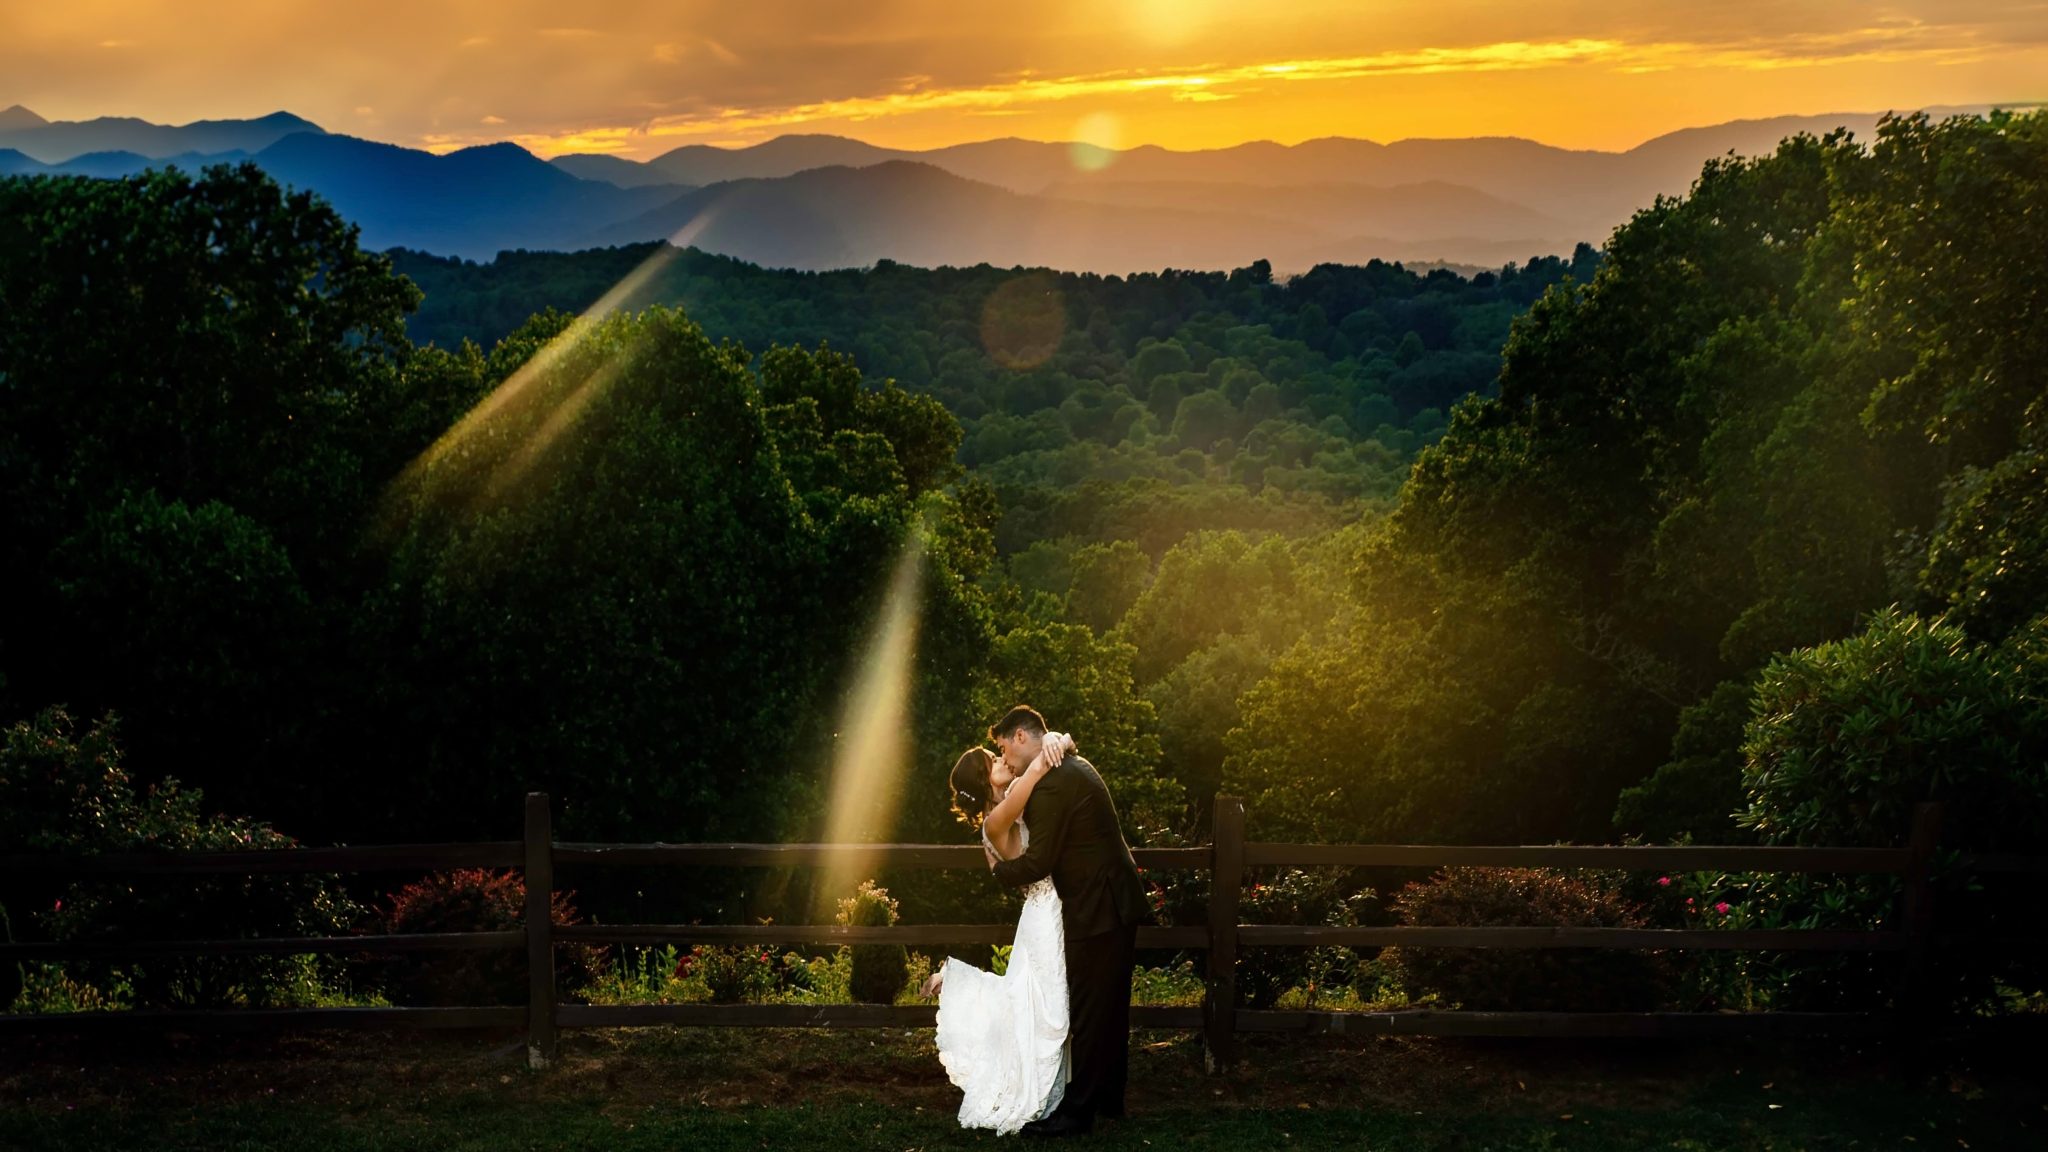 Asheville Wedding Photographer captures a bride and groom's kiss in front of beautiful mountains at sunset.